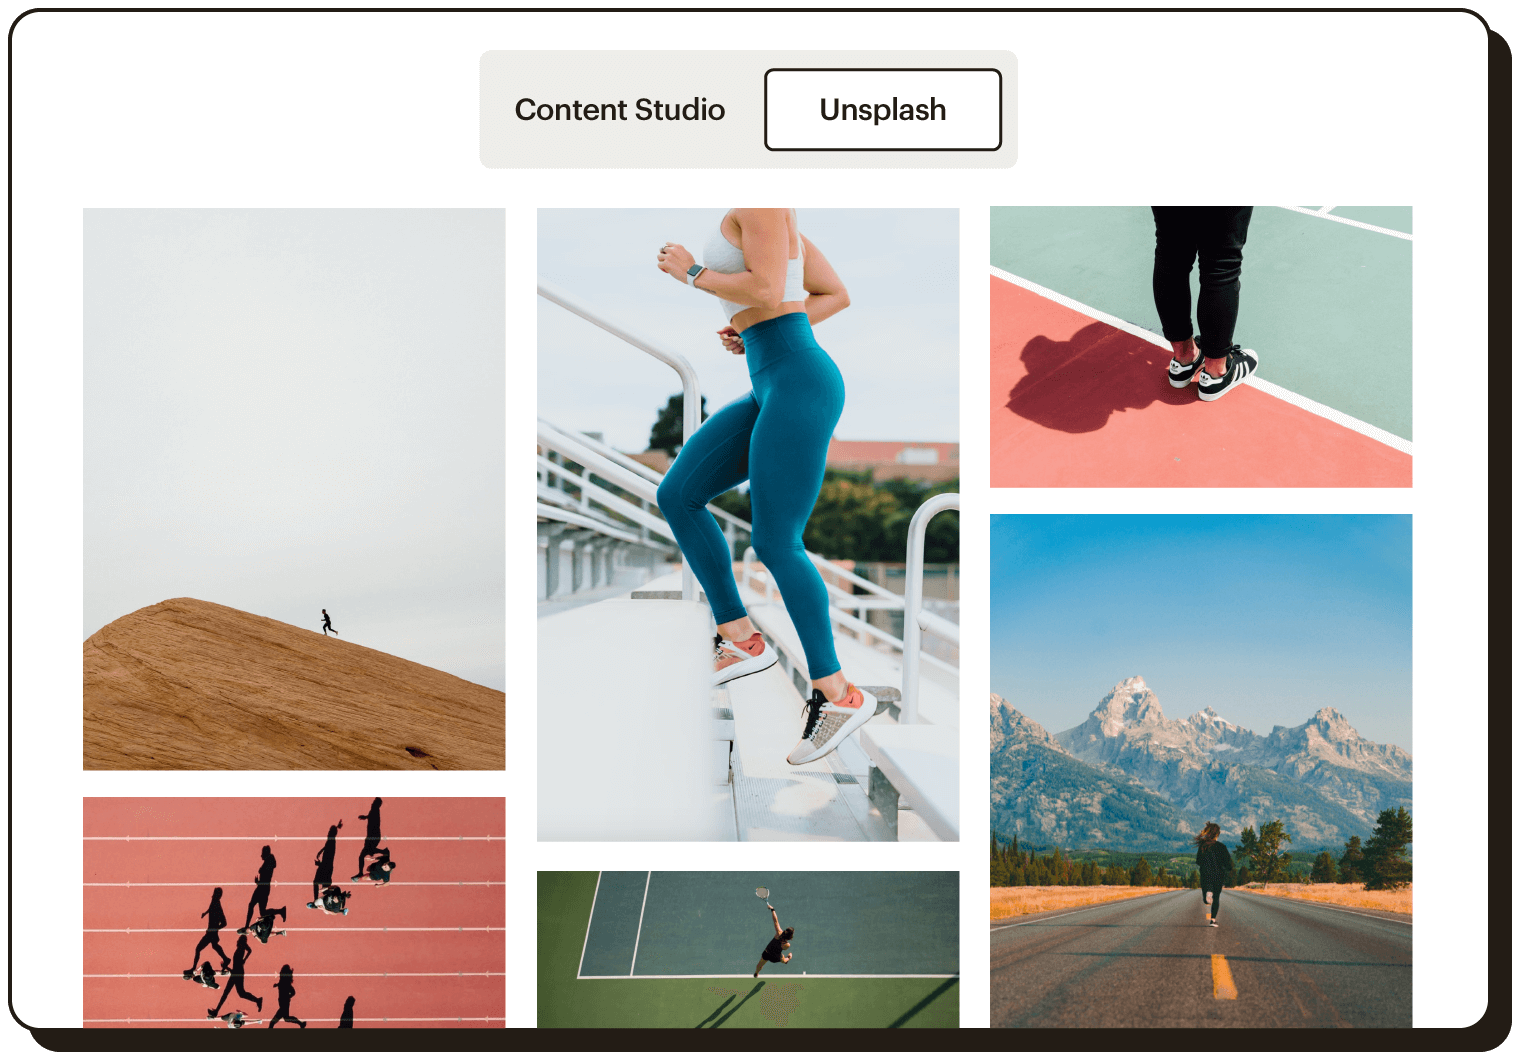 Abstract UI showing various Unsplash images that can be added to a Mailchimp website